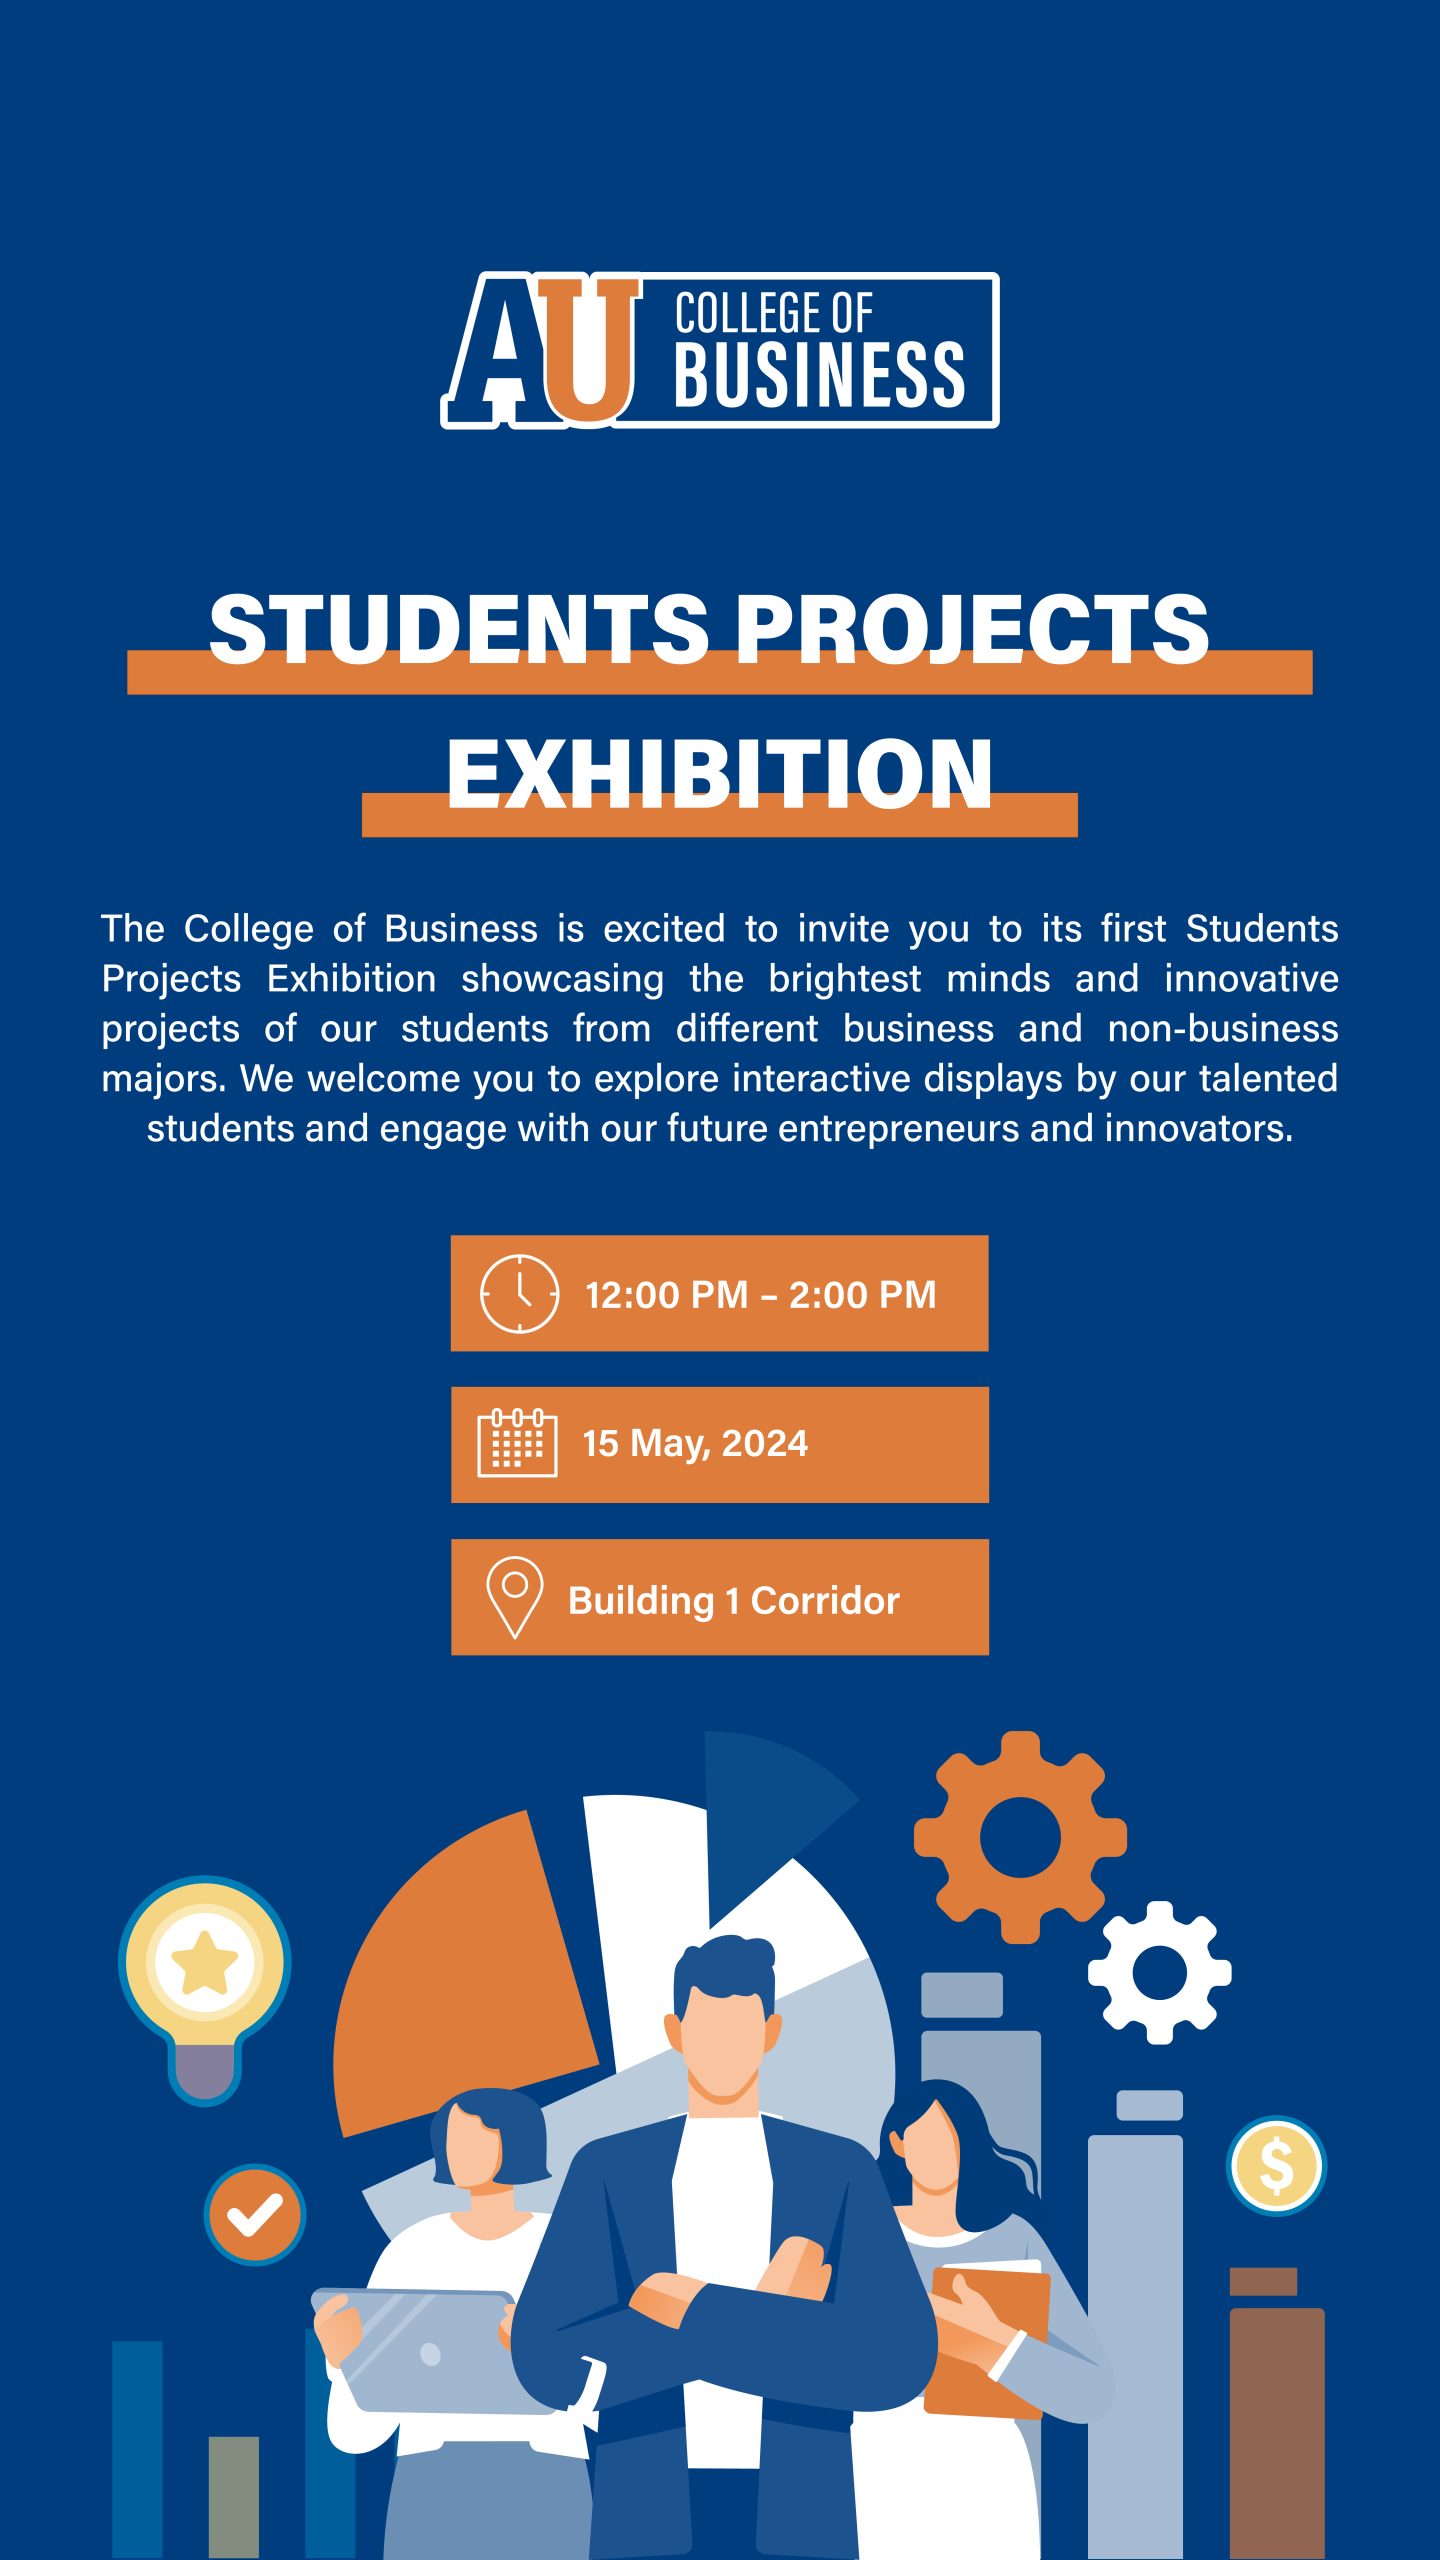 STUDENTS PROJECTS EXHIBITION